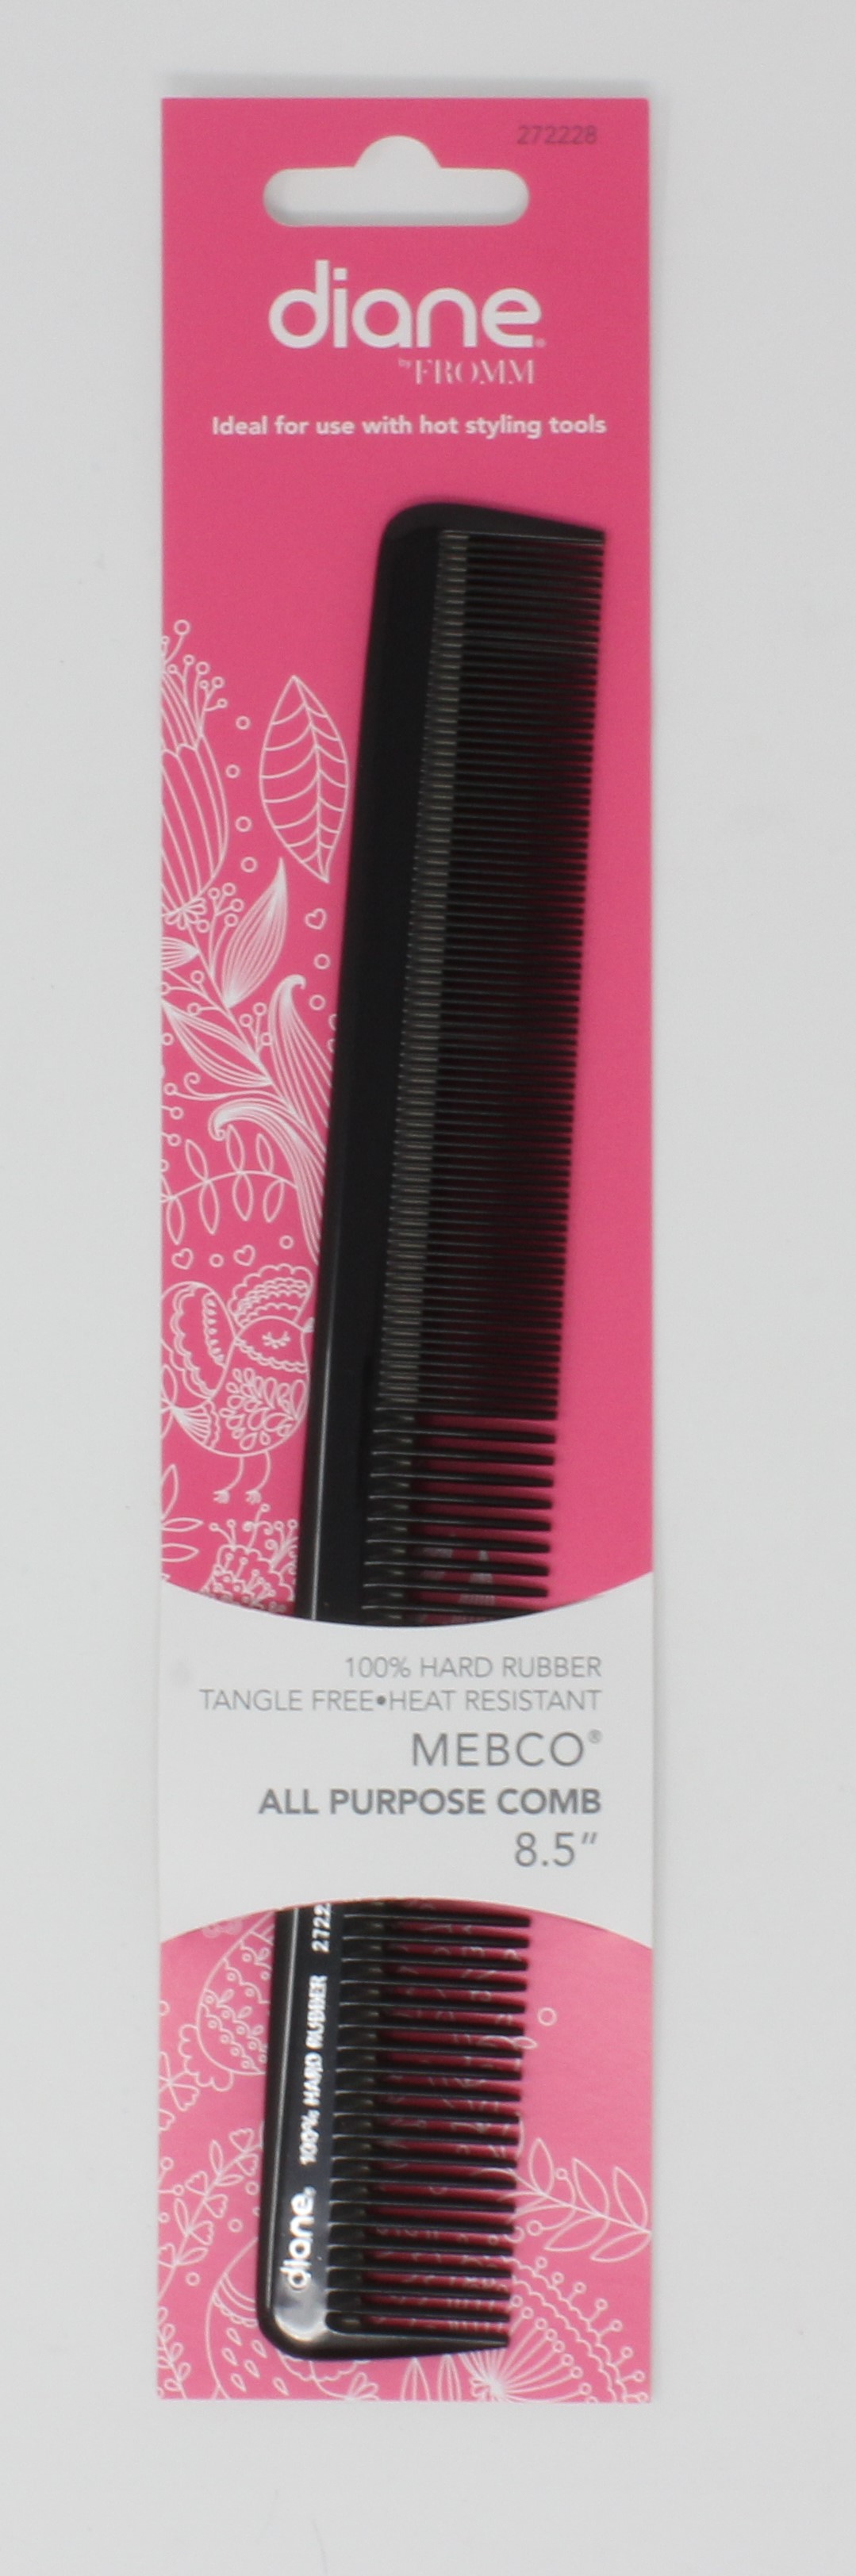 DIANE 100% HARD RUBBER TANGLE FREE AND HEAT RESISTANT MEBCO ALL PURPOSE COMB UPC # 023508001409 - Click Image to Close